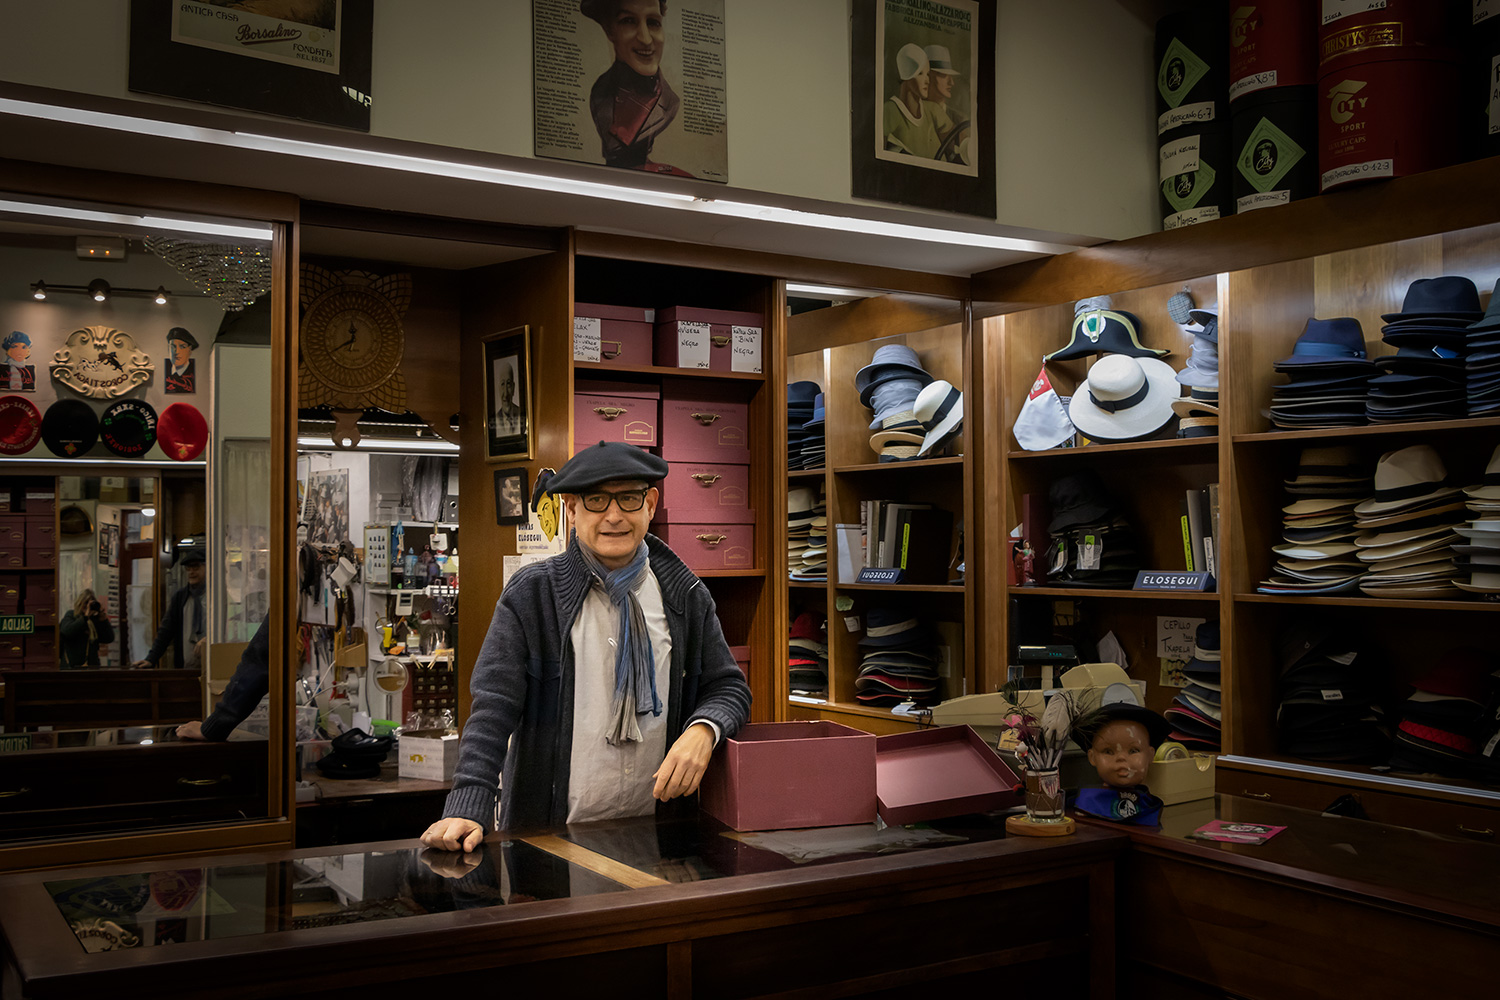 In the beret shop in Bilbao you can buy classic berets and get a good tip